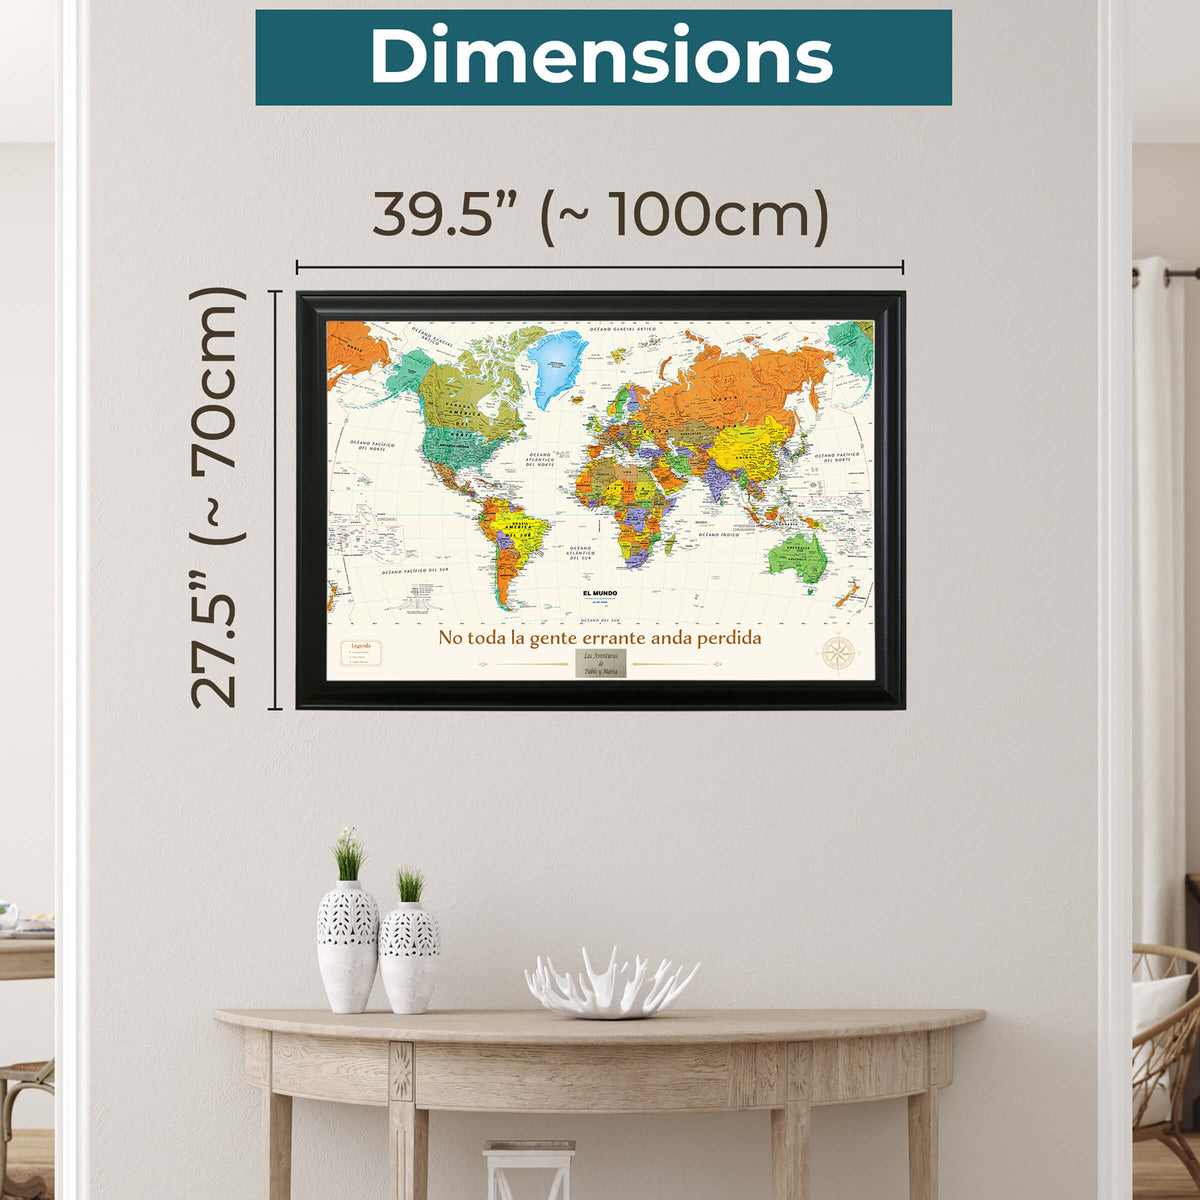 Spanish Contemporary World Map Dimensions